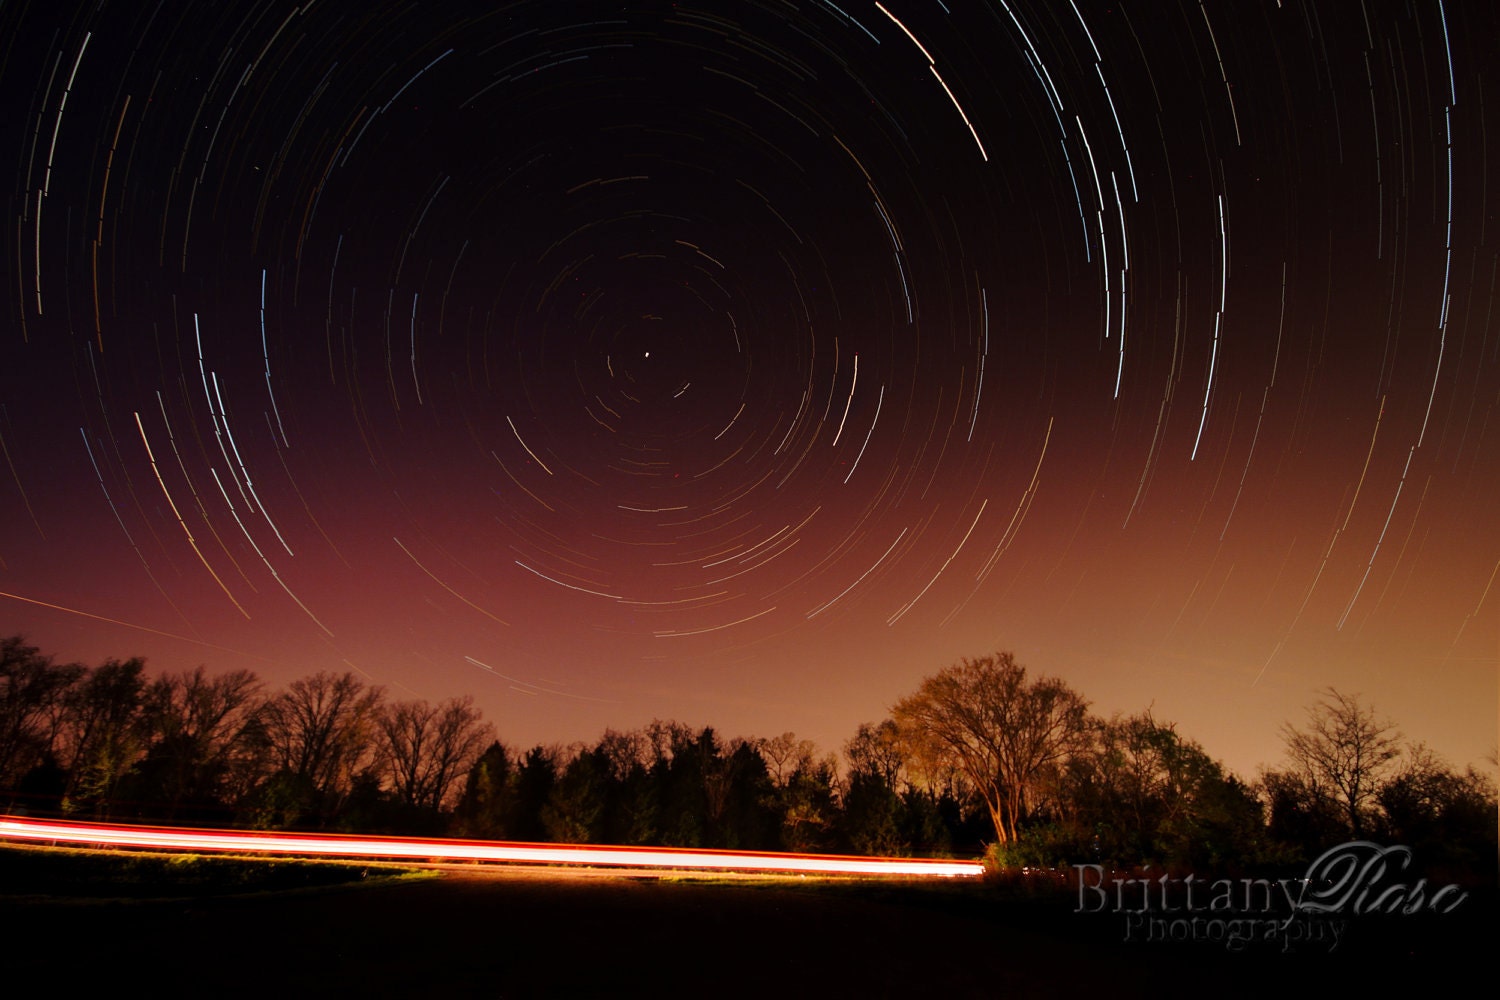 Sit and Watch the Stars Pass Us By, Star Trails over Highway, Fine Art Photographic Print - 8x12